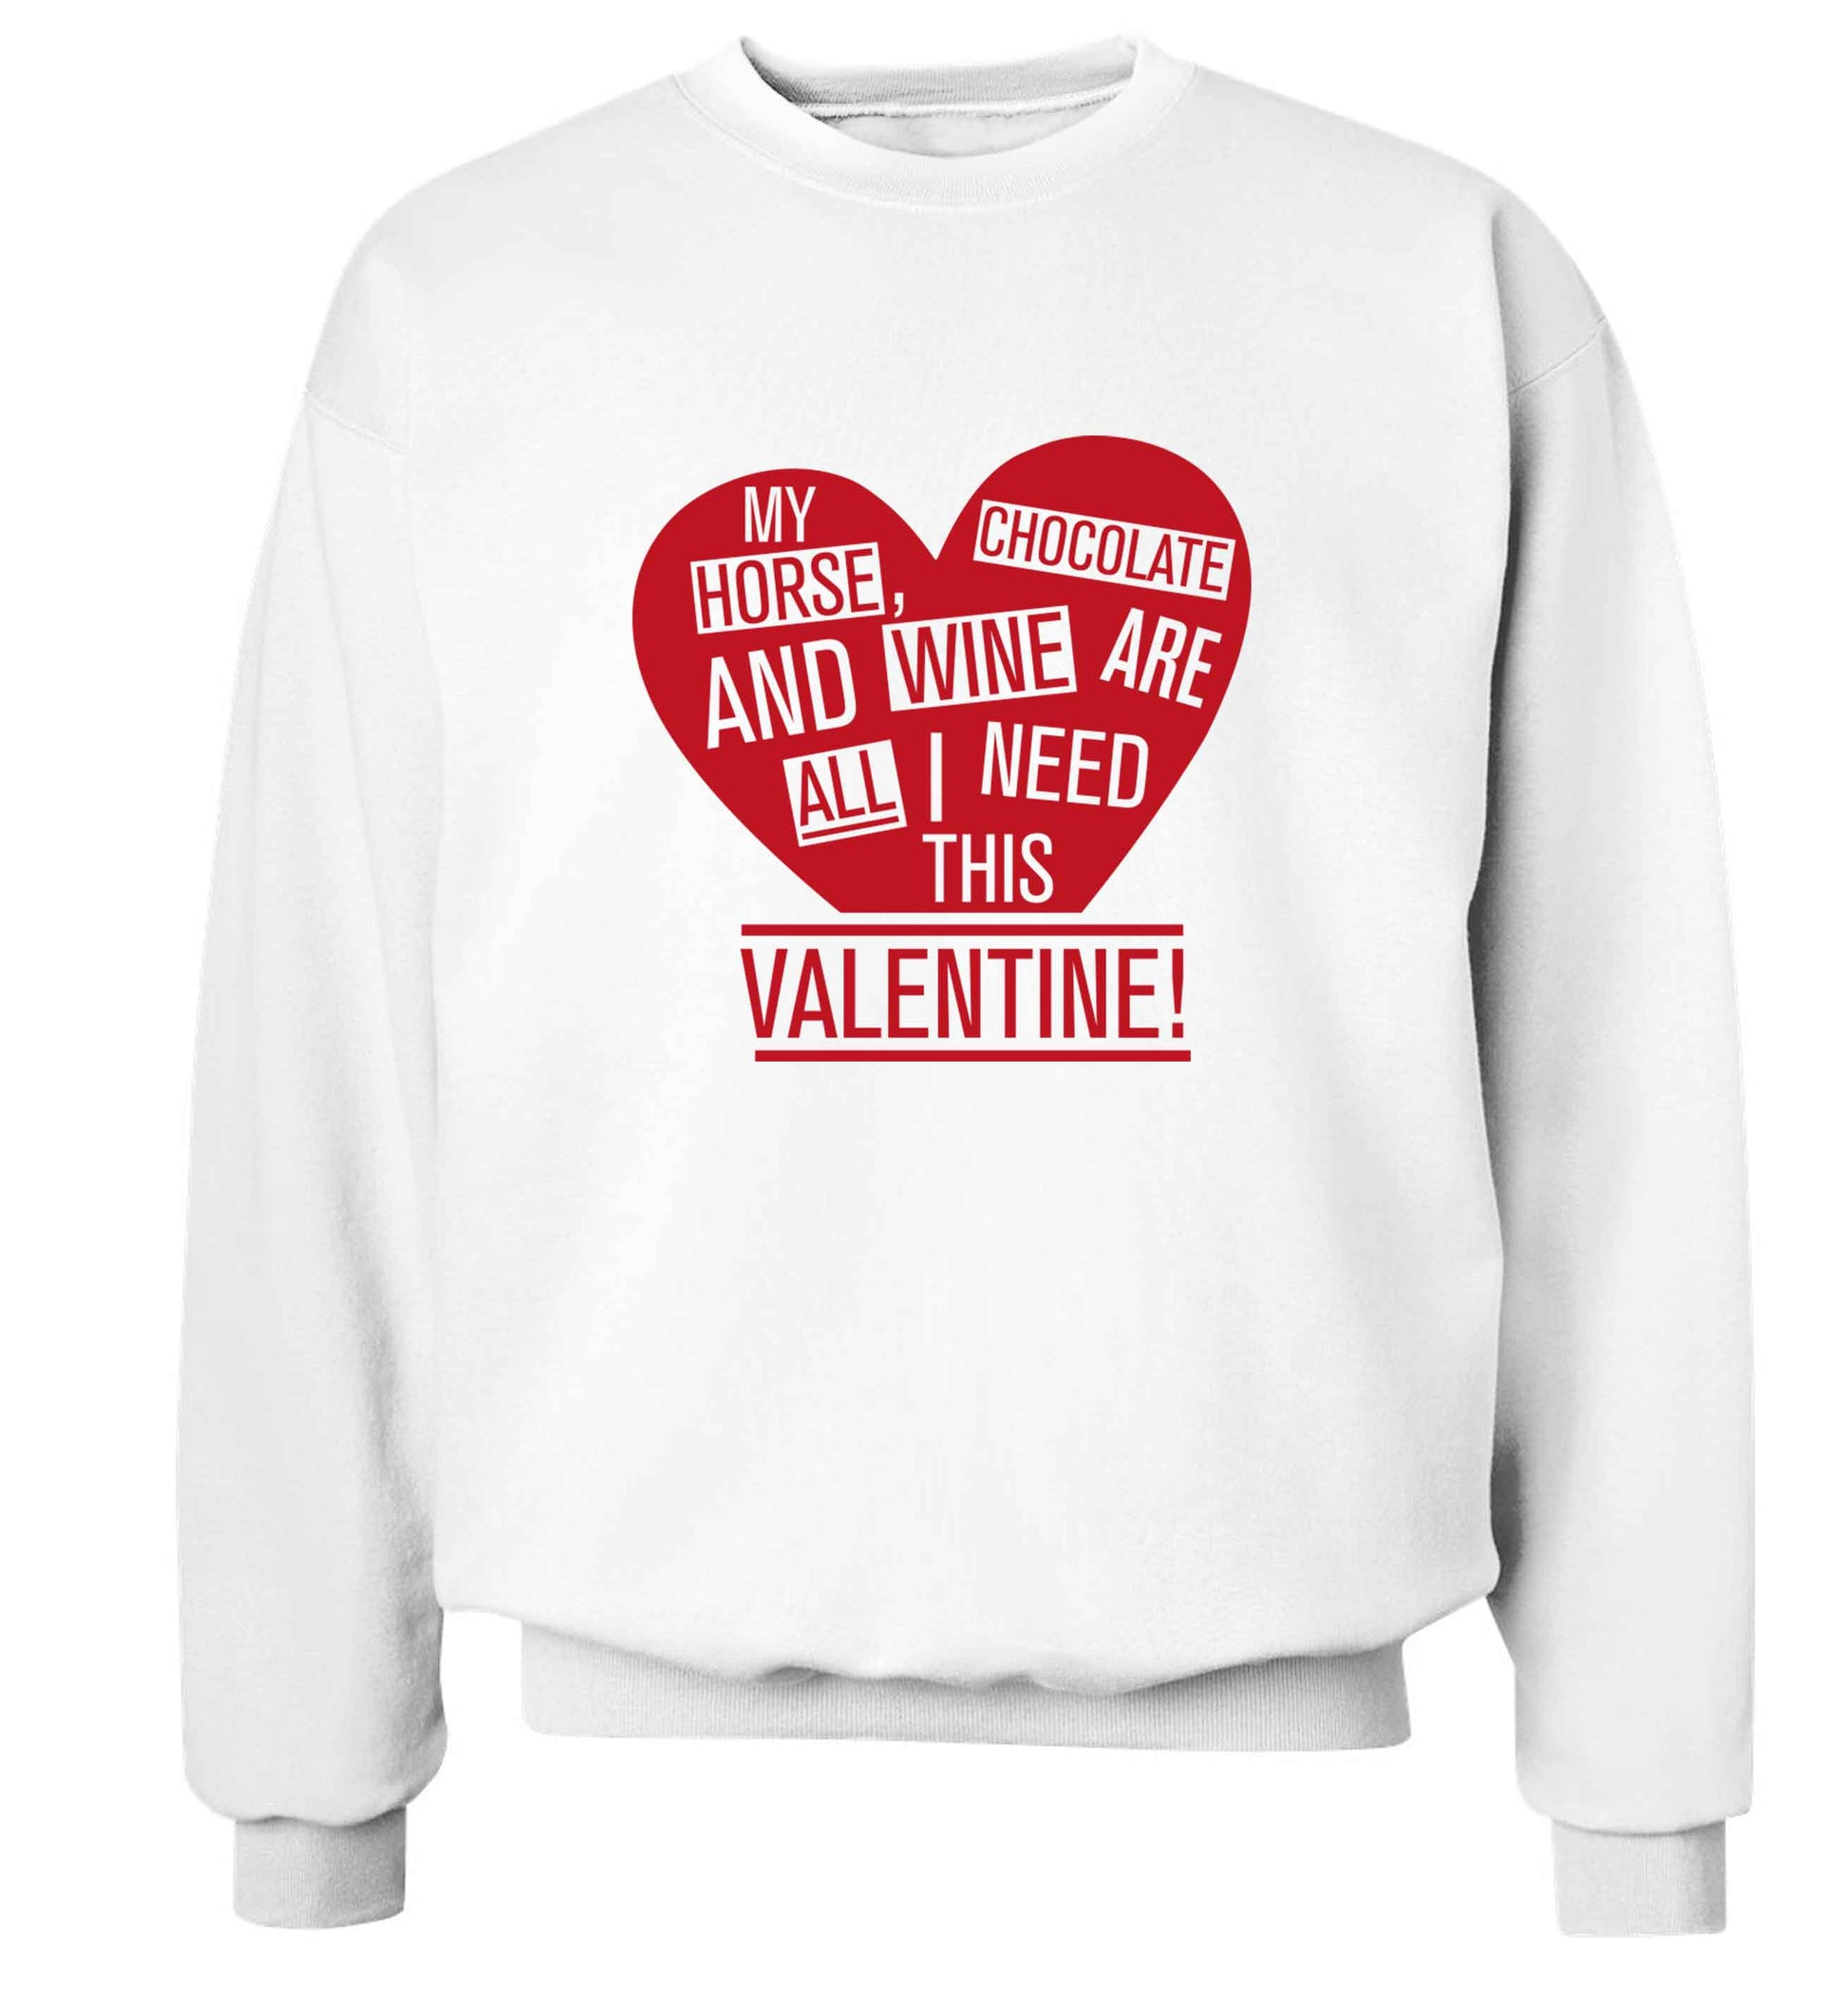 My horse chocolate and wine are all I need this valentine adult's unisex white sweater 2XL